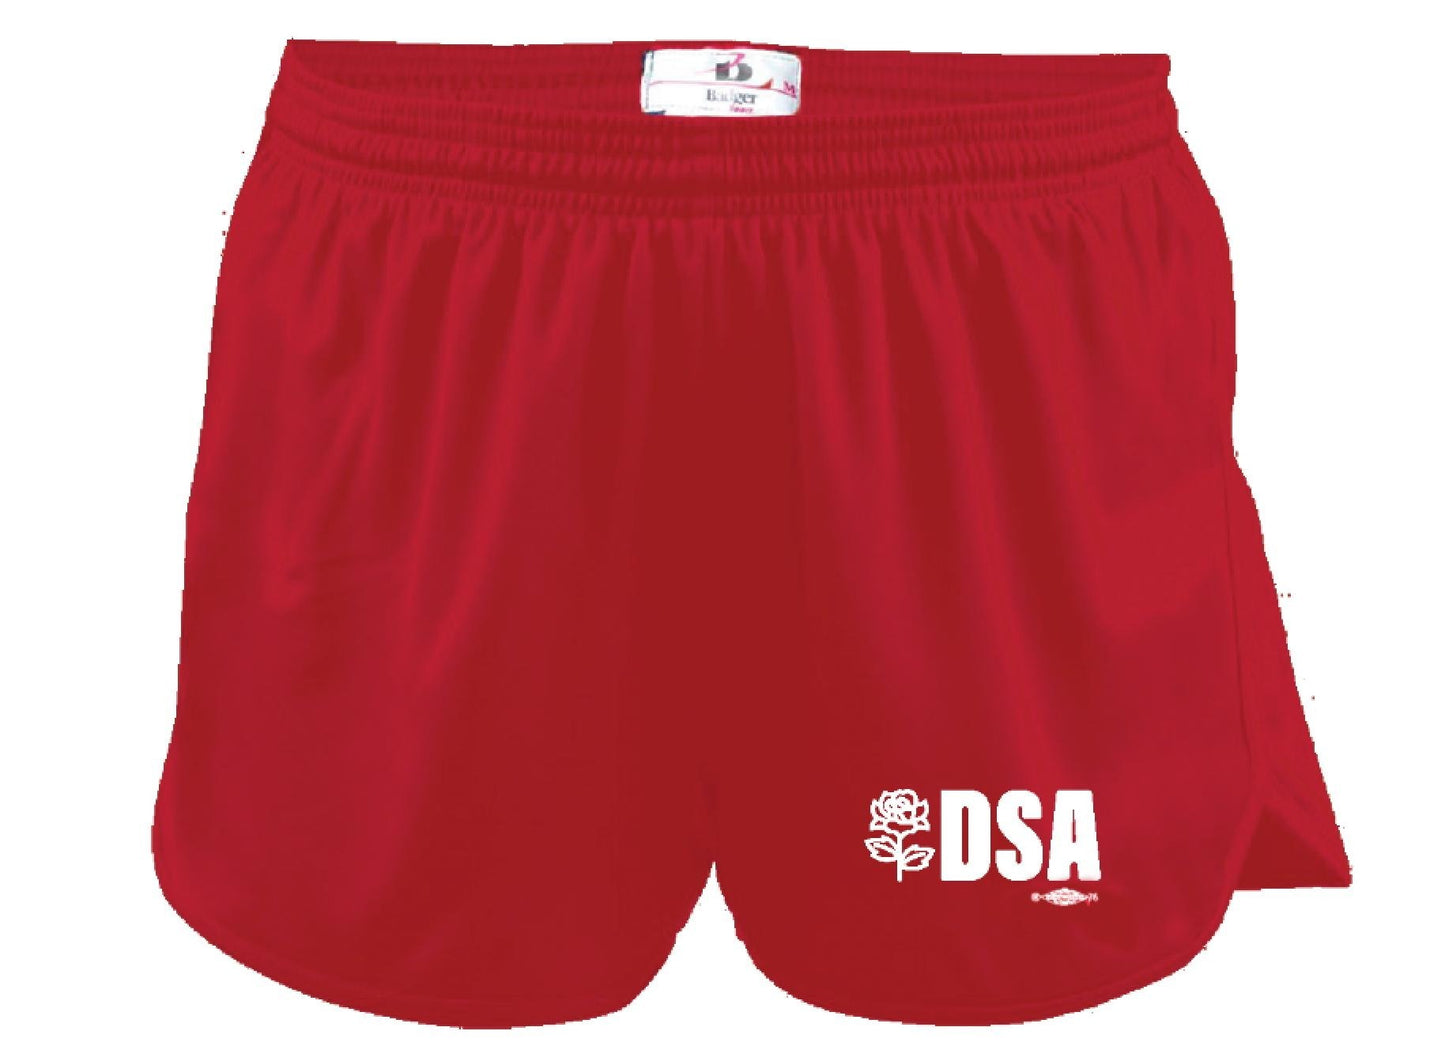 Red track shorts with white text DSA and rose on the leg